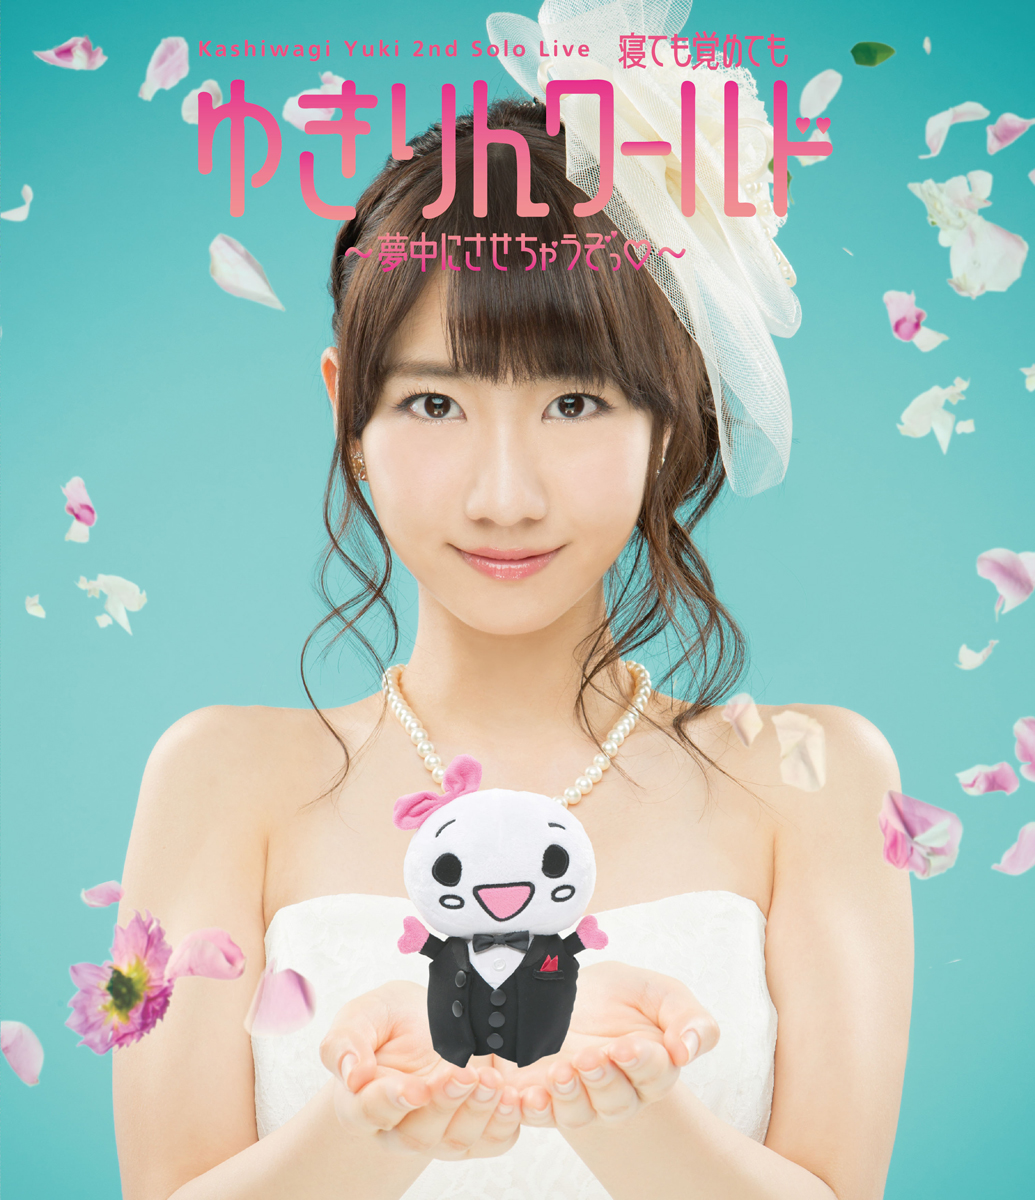 AKB48’s Kashiwagi Yuki unveiled the cover photos (wearing a wedding dress!) for her new Blu-ray & DVD!